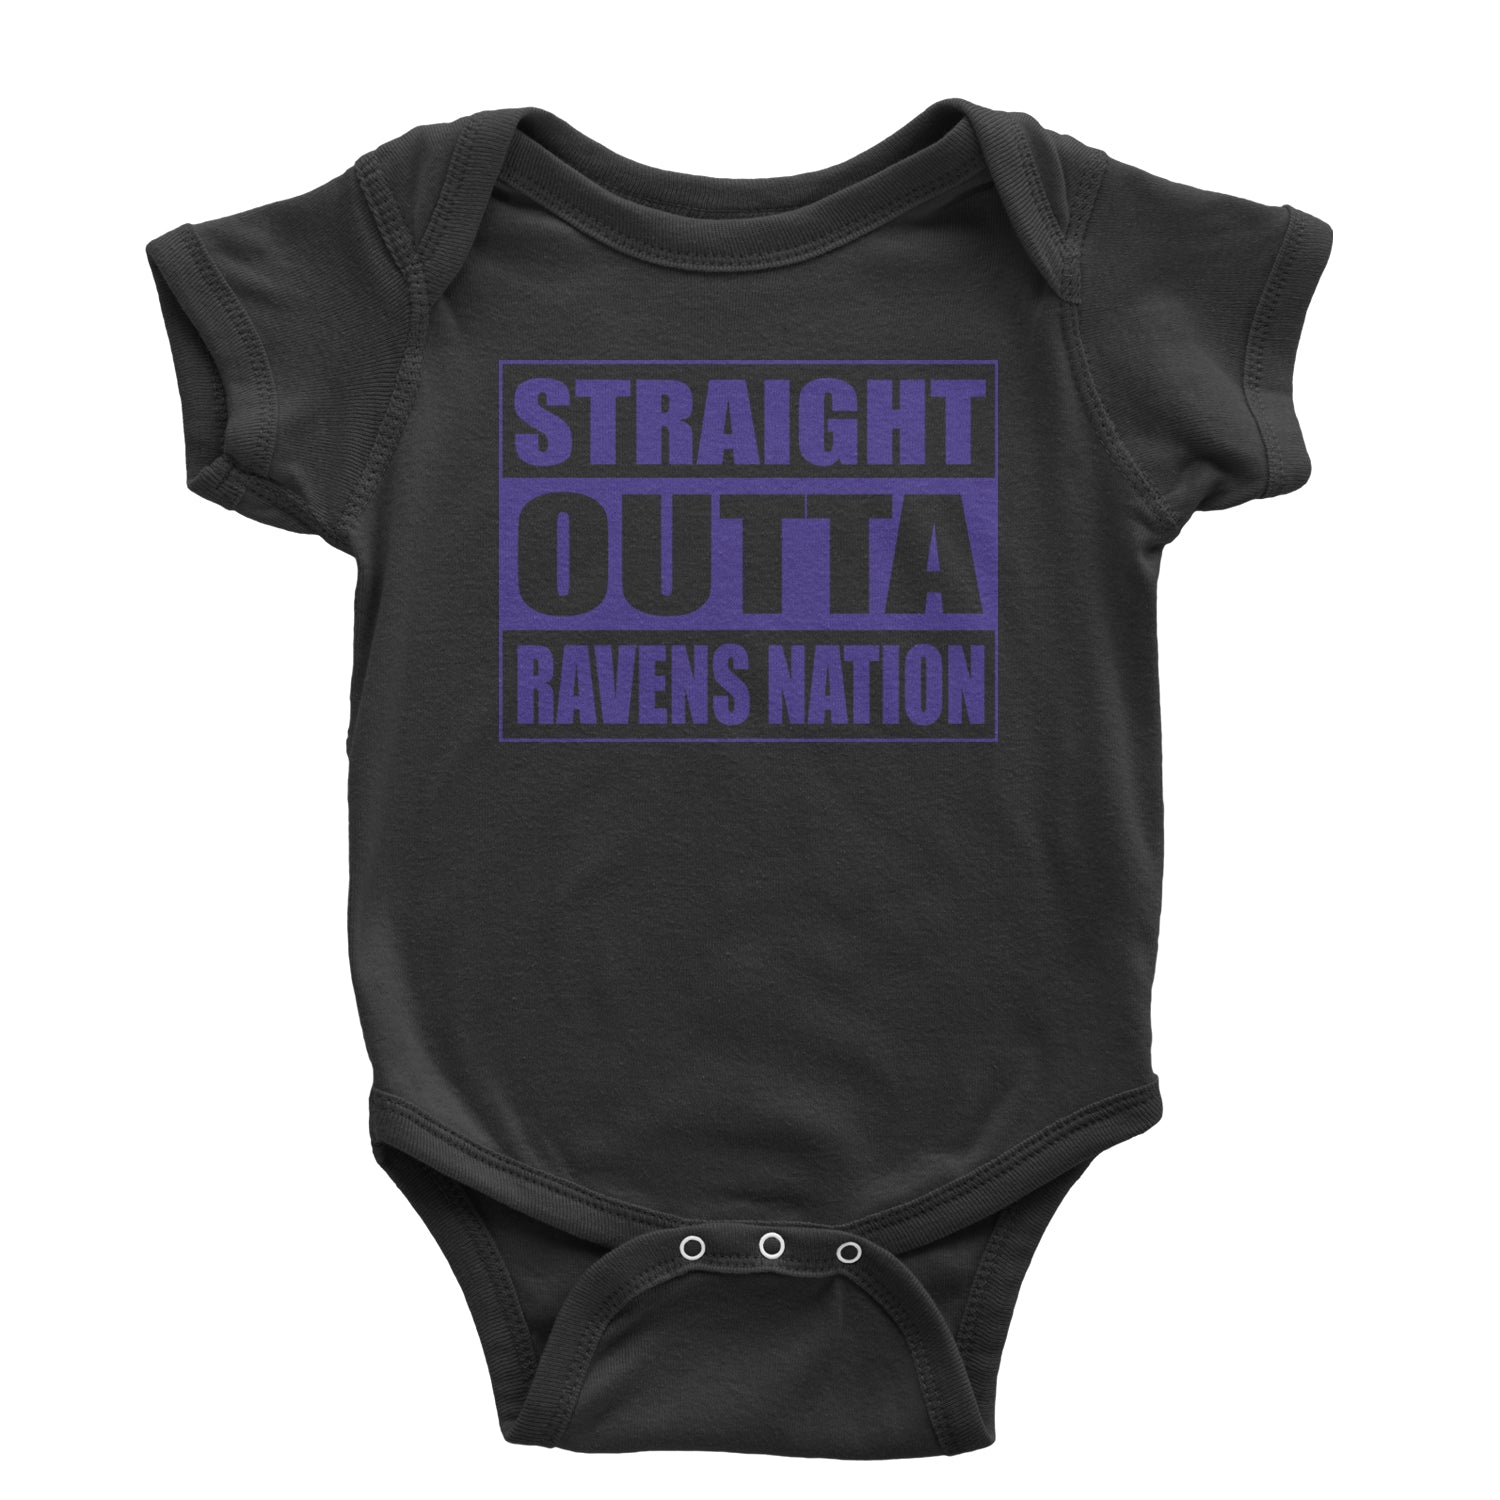 Straight Outta Ravens Nation Infant One-Piece Romper Bodysuit and Toddler T-shirt